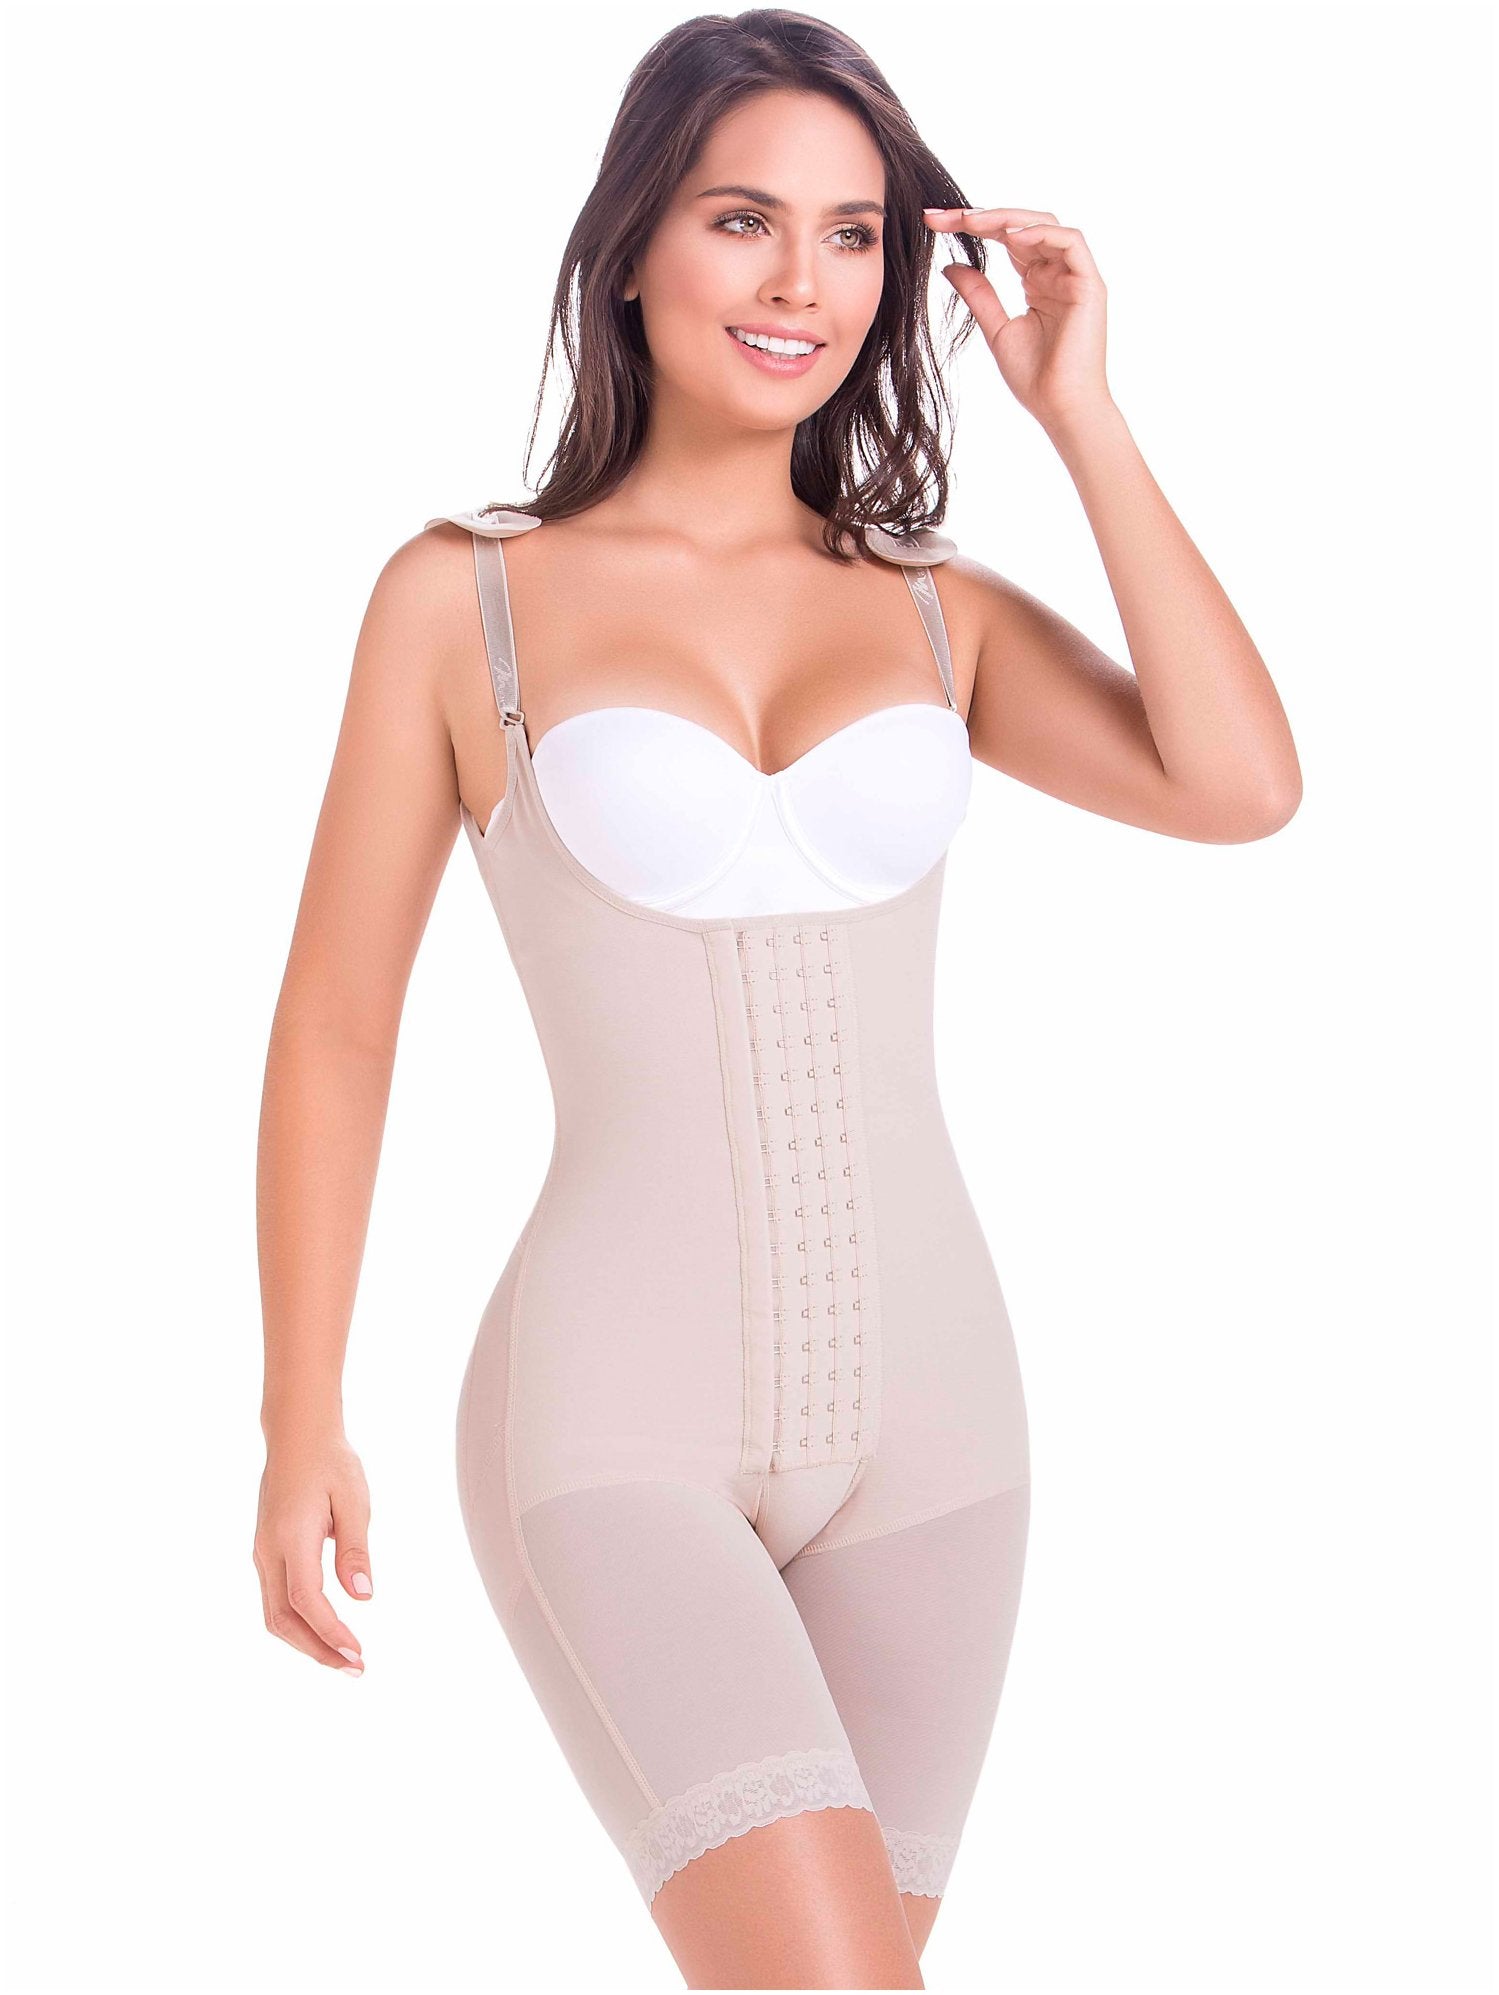 Fajas MeliBelt Colombianas Post quirurgicas. BBL Post Surgical Girdles 3027  XS